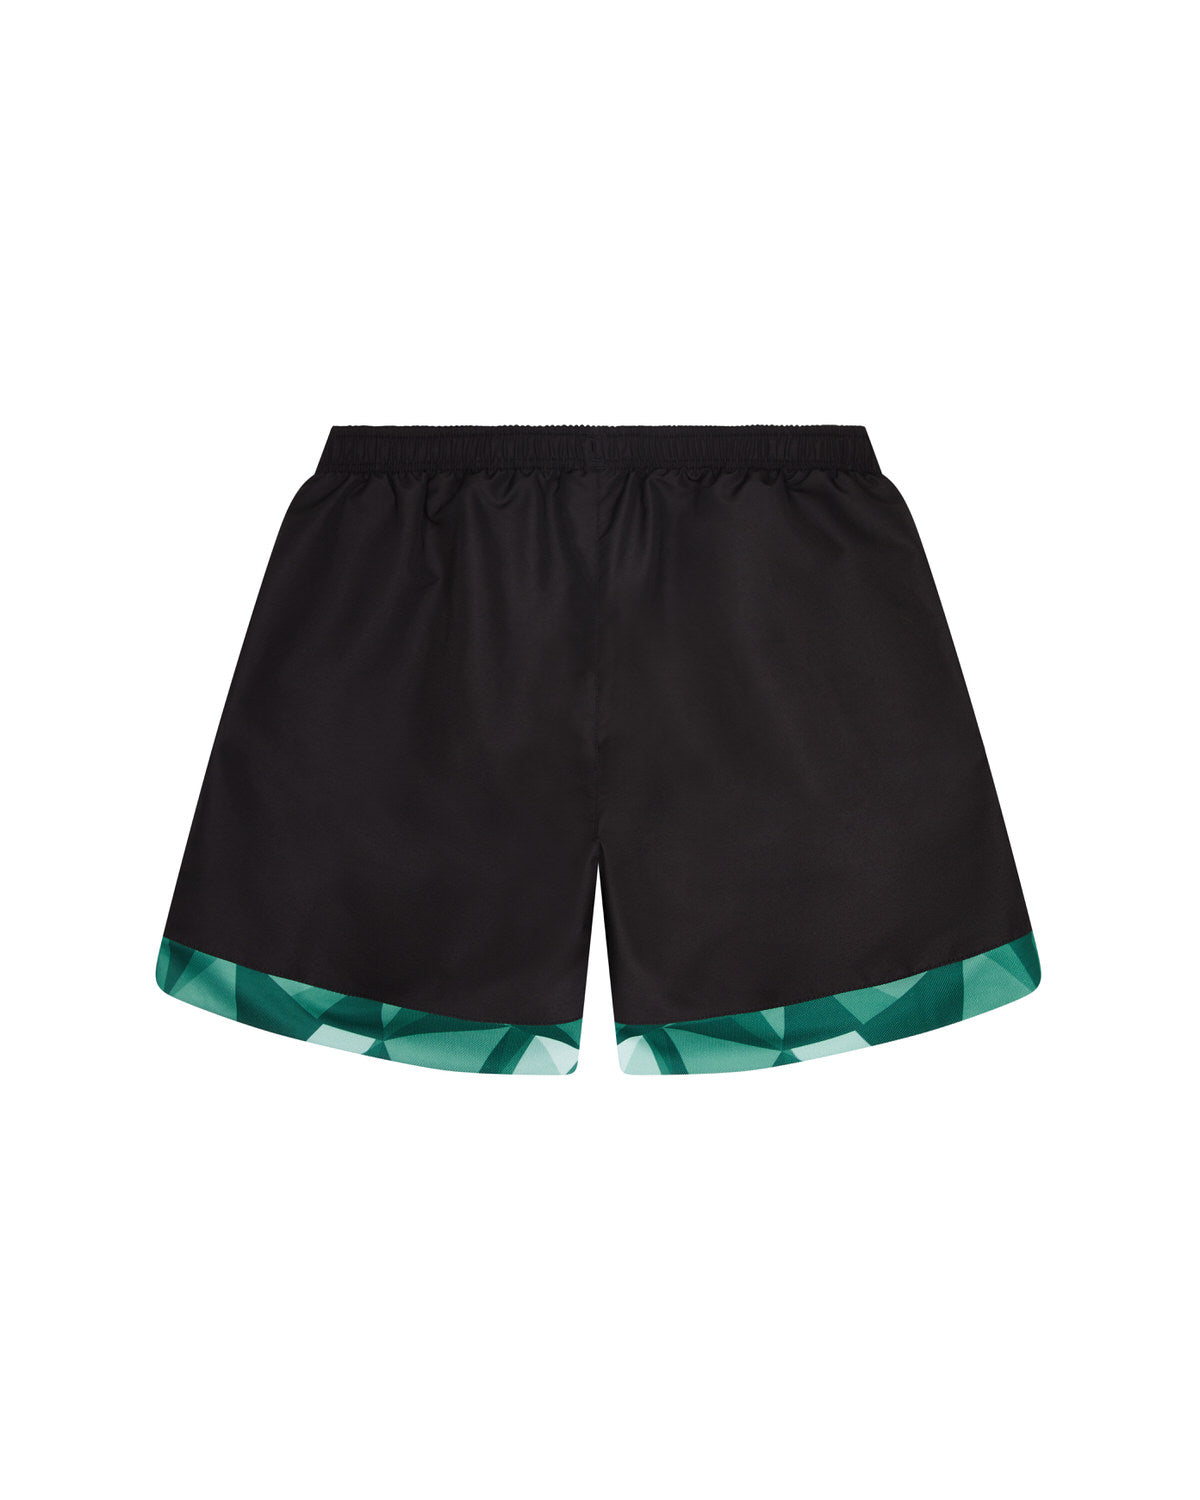 Leicester Tigers - Obsidian Leisure Short - Black